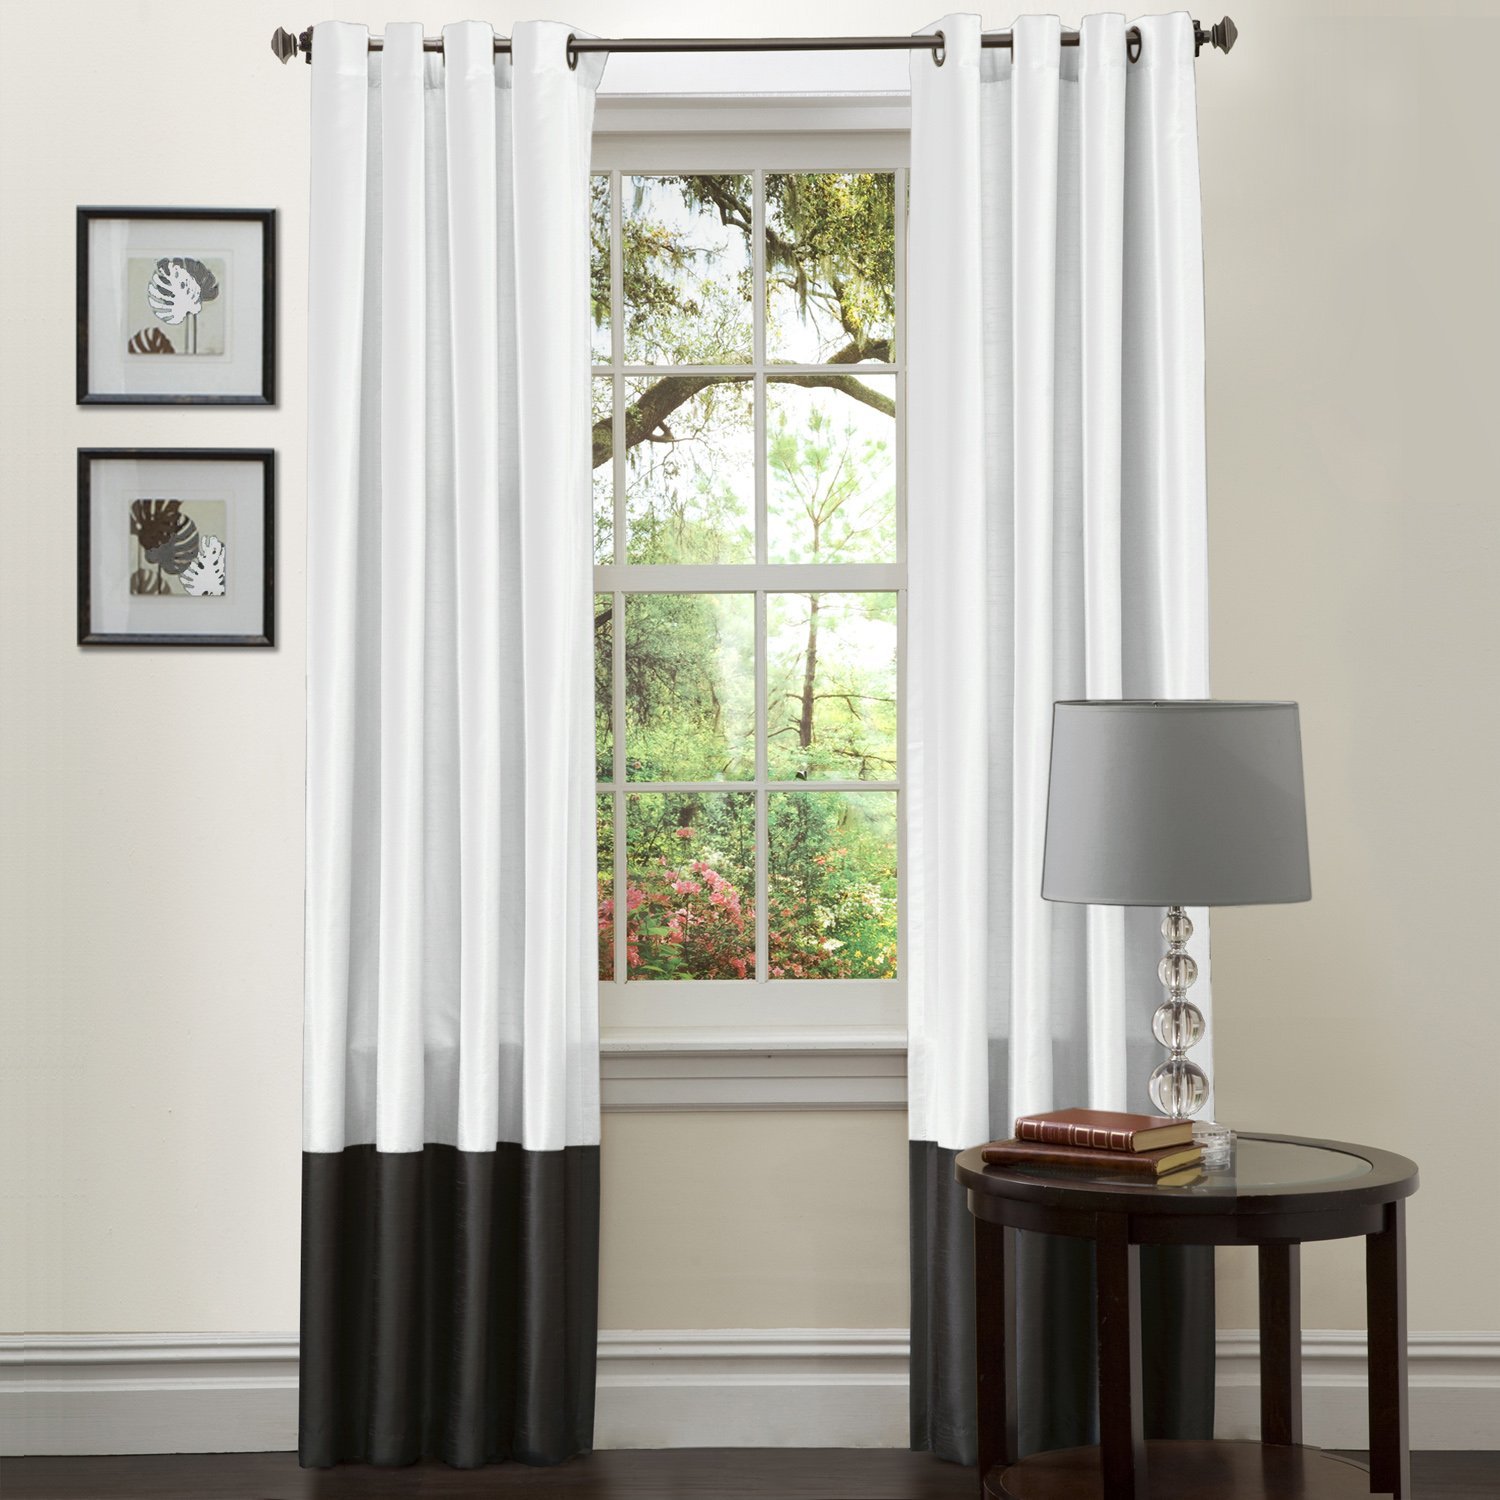 In The White Room With Black Curtains Home Design Ideas And Pictures